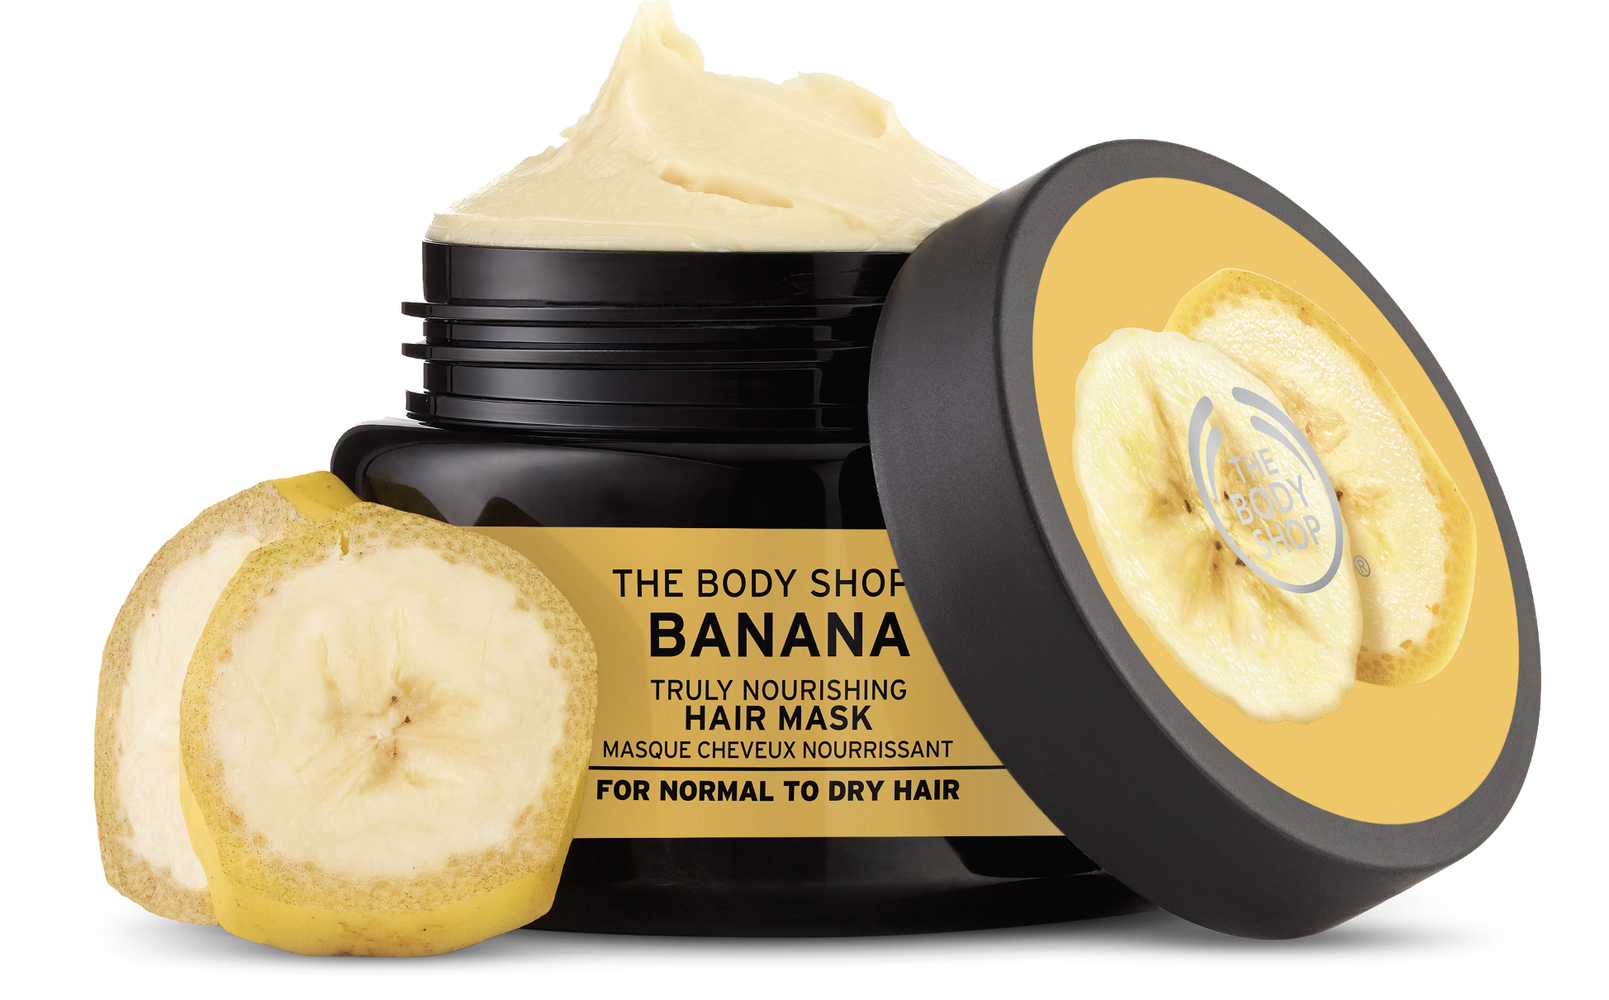 Banana Truly Nourishing Hair Mask from the body shop